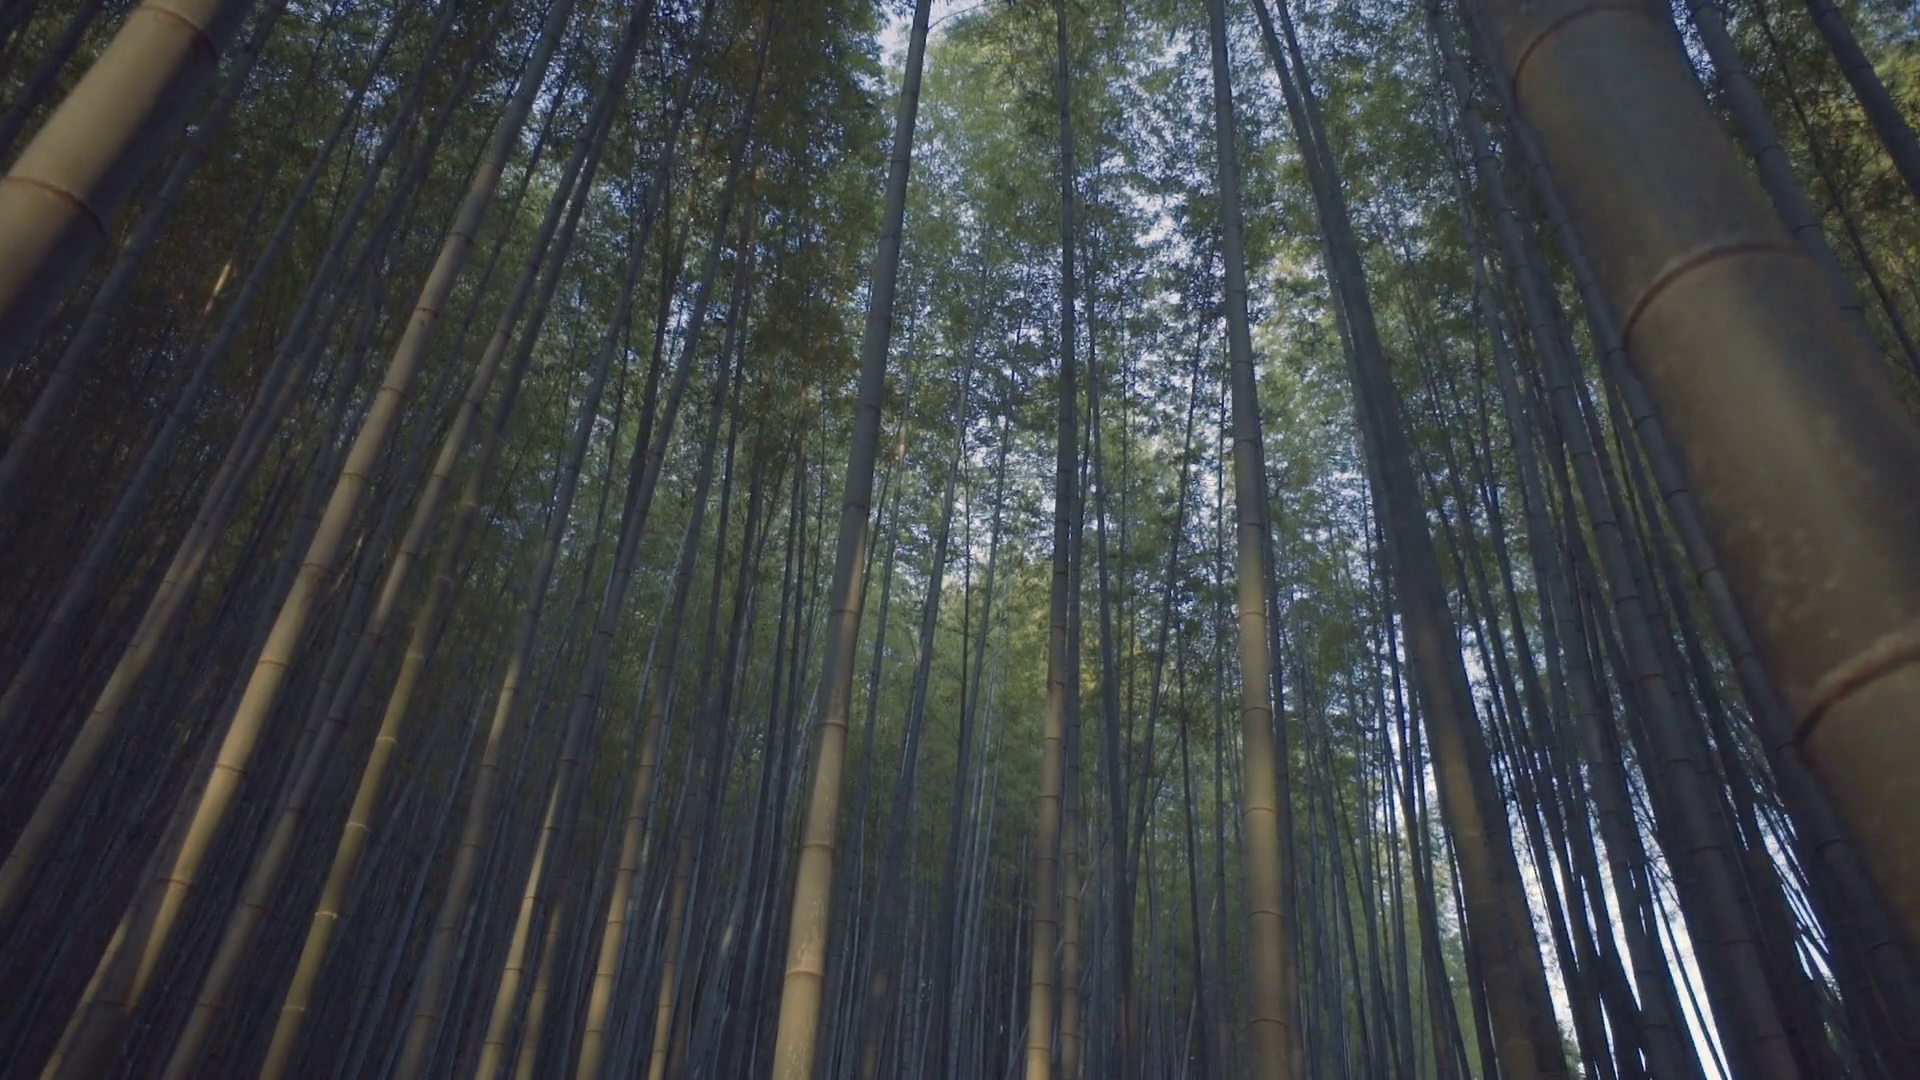 Looking up at the sky in a bamboo forest in Matsuyama, Japan at ...